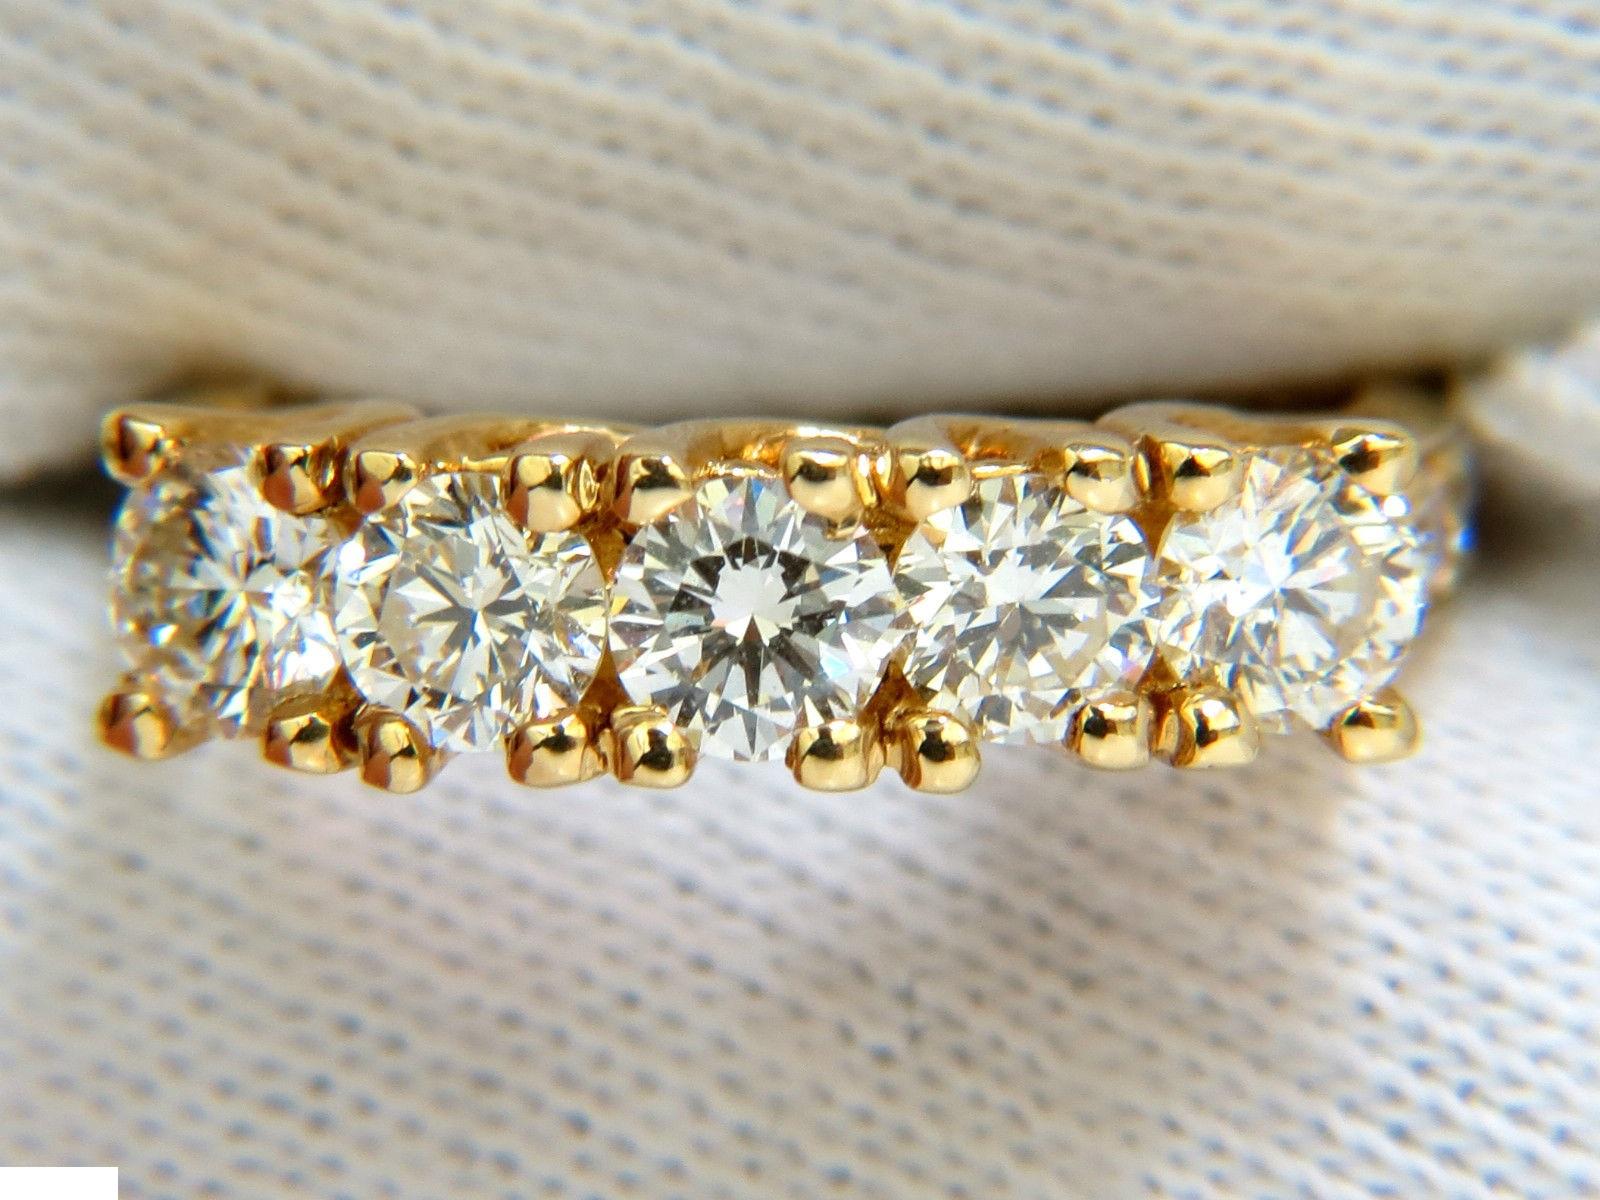 1.82ct. 5 diamonds Raised up band 

includes side pave mount diamonds

Rounds, Full Brilliant cuts

Vs-1 clarity

I-J color

14kt yellow gold.

Item: 6.0gms.

5.2mm thick

Current size: 6.25

Can be resized, please inquire

14kt. yellow gold.